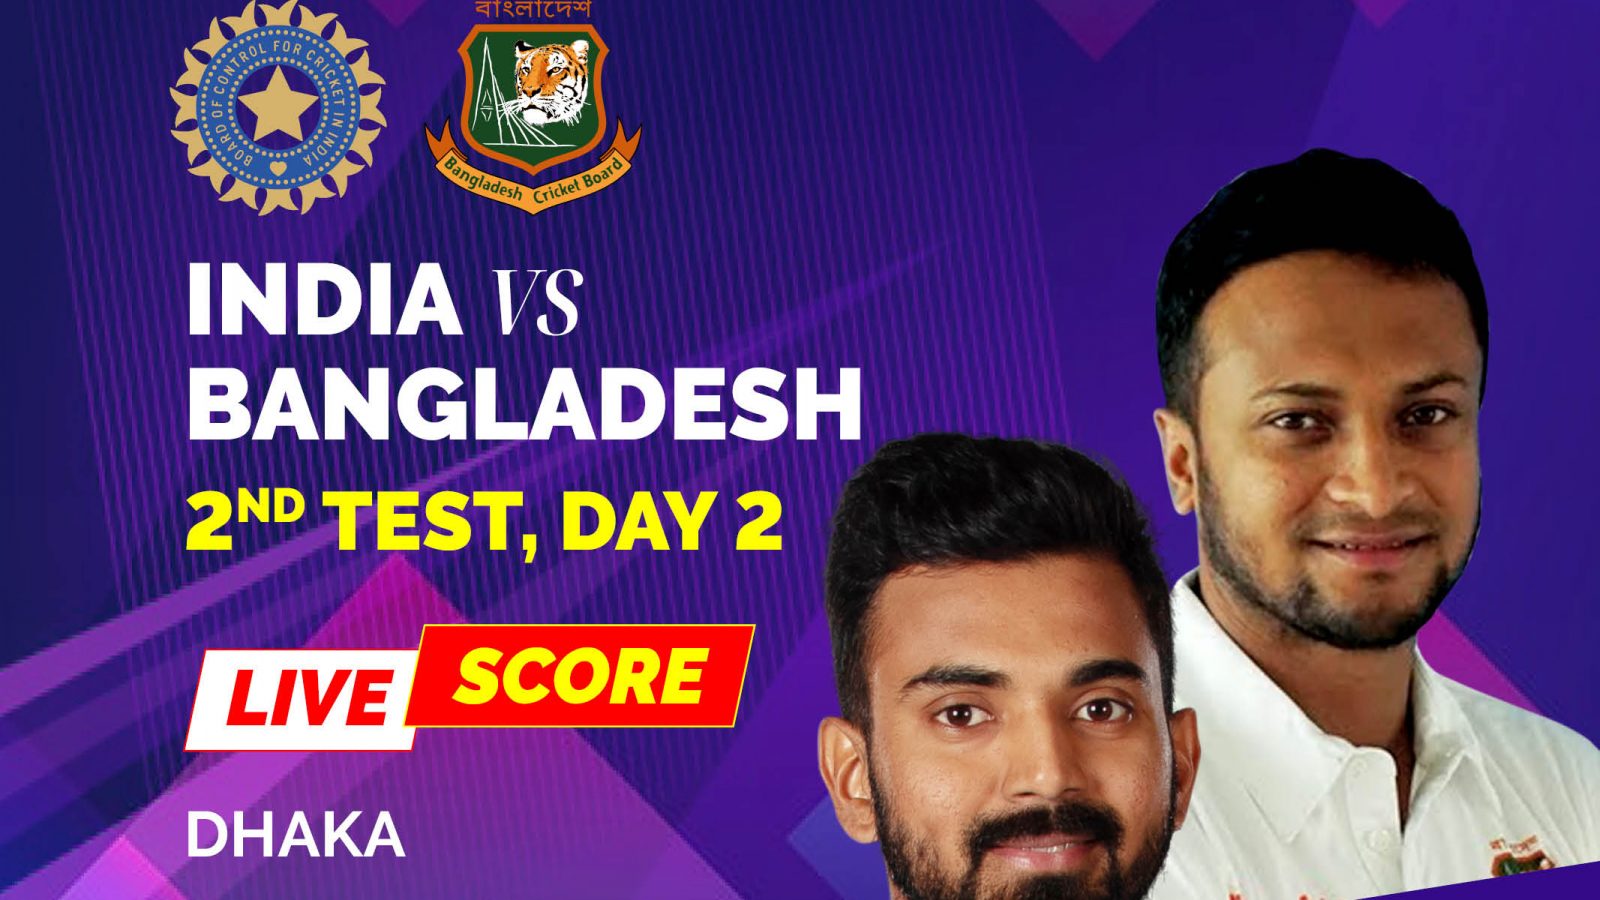 IND v BAN Highlights 2nd Test, Day 2 Pant, Iyer Help India Dominate